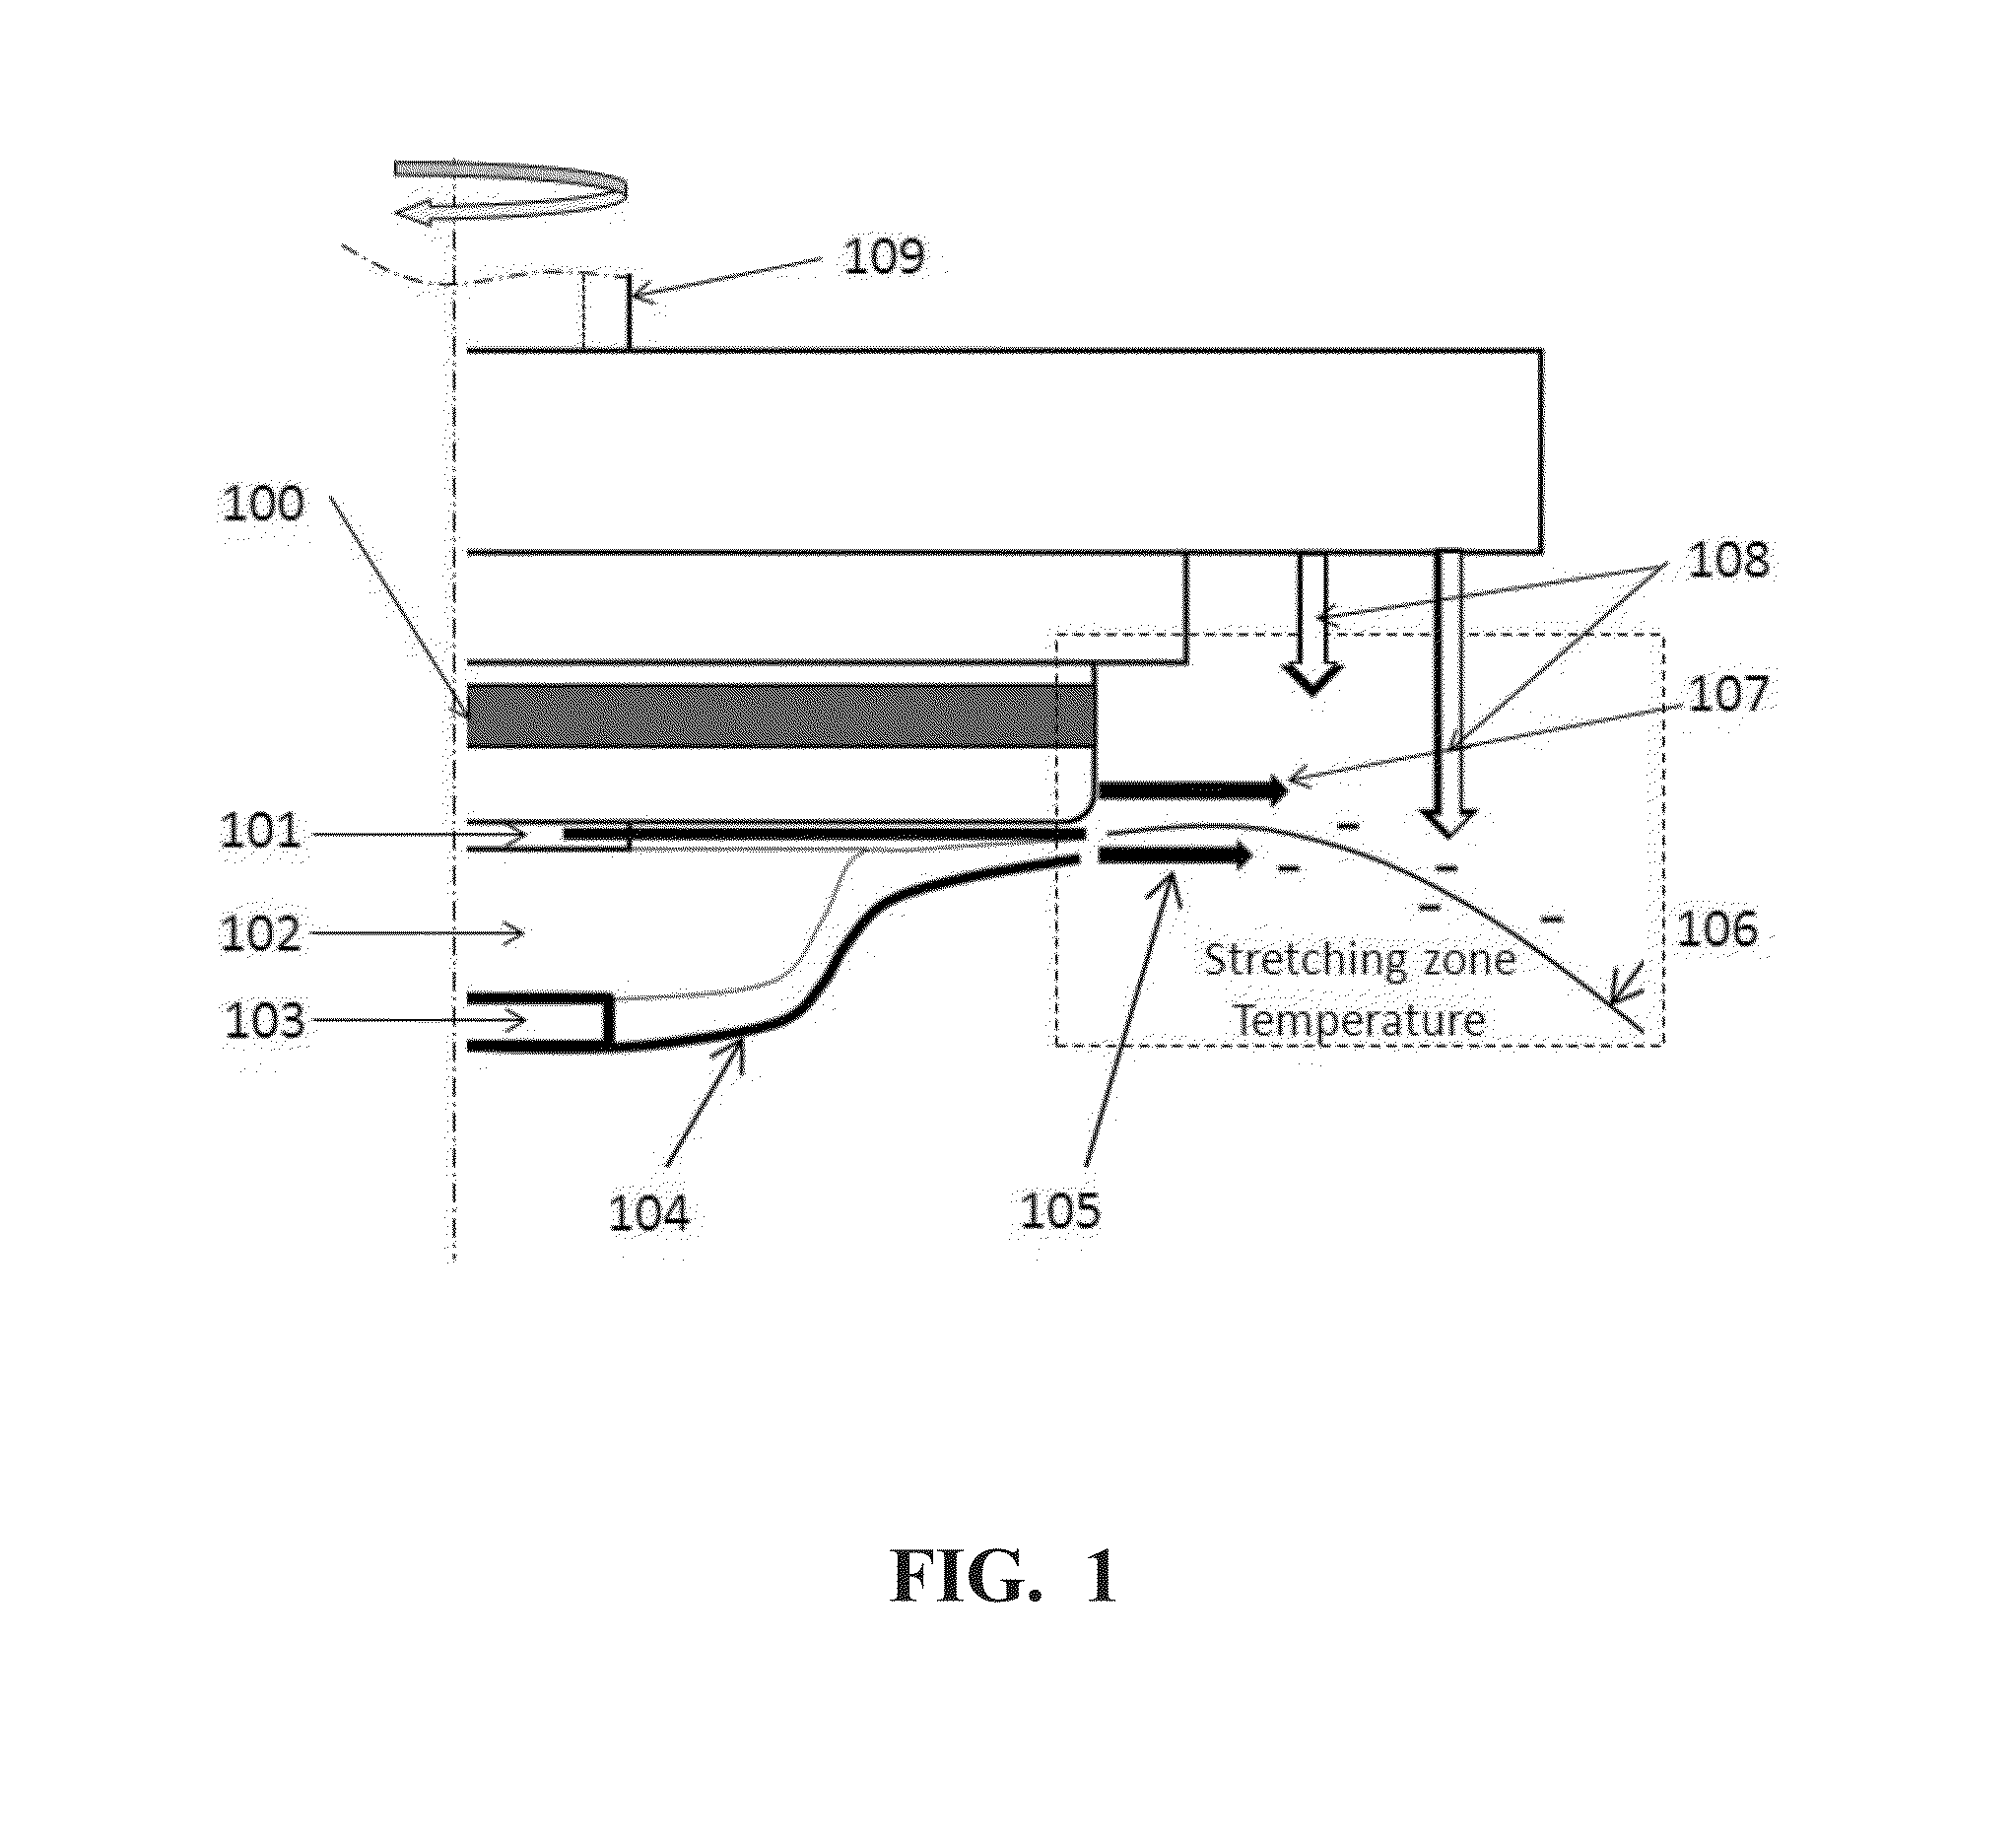 Apparatus for production of polymeric nanofibers